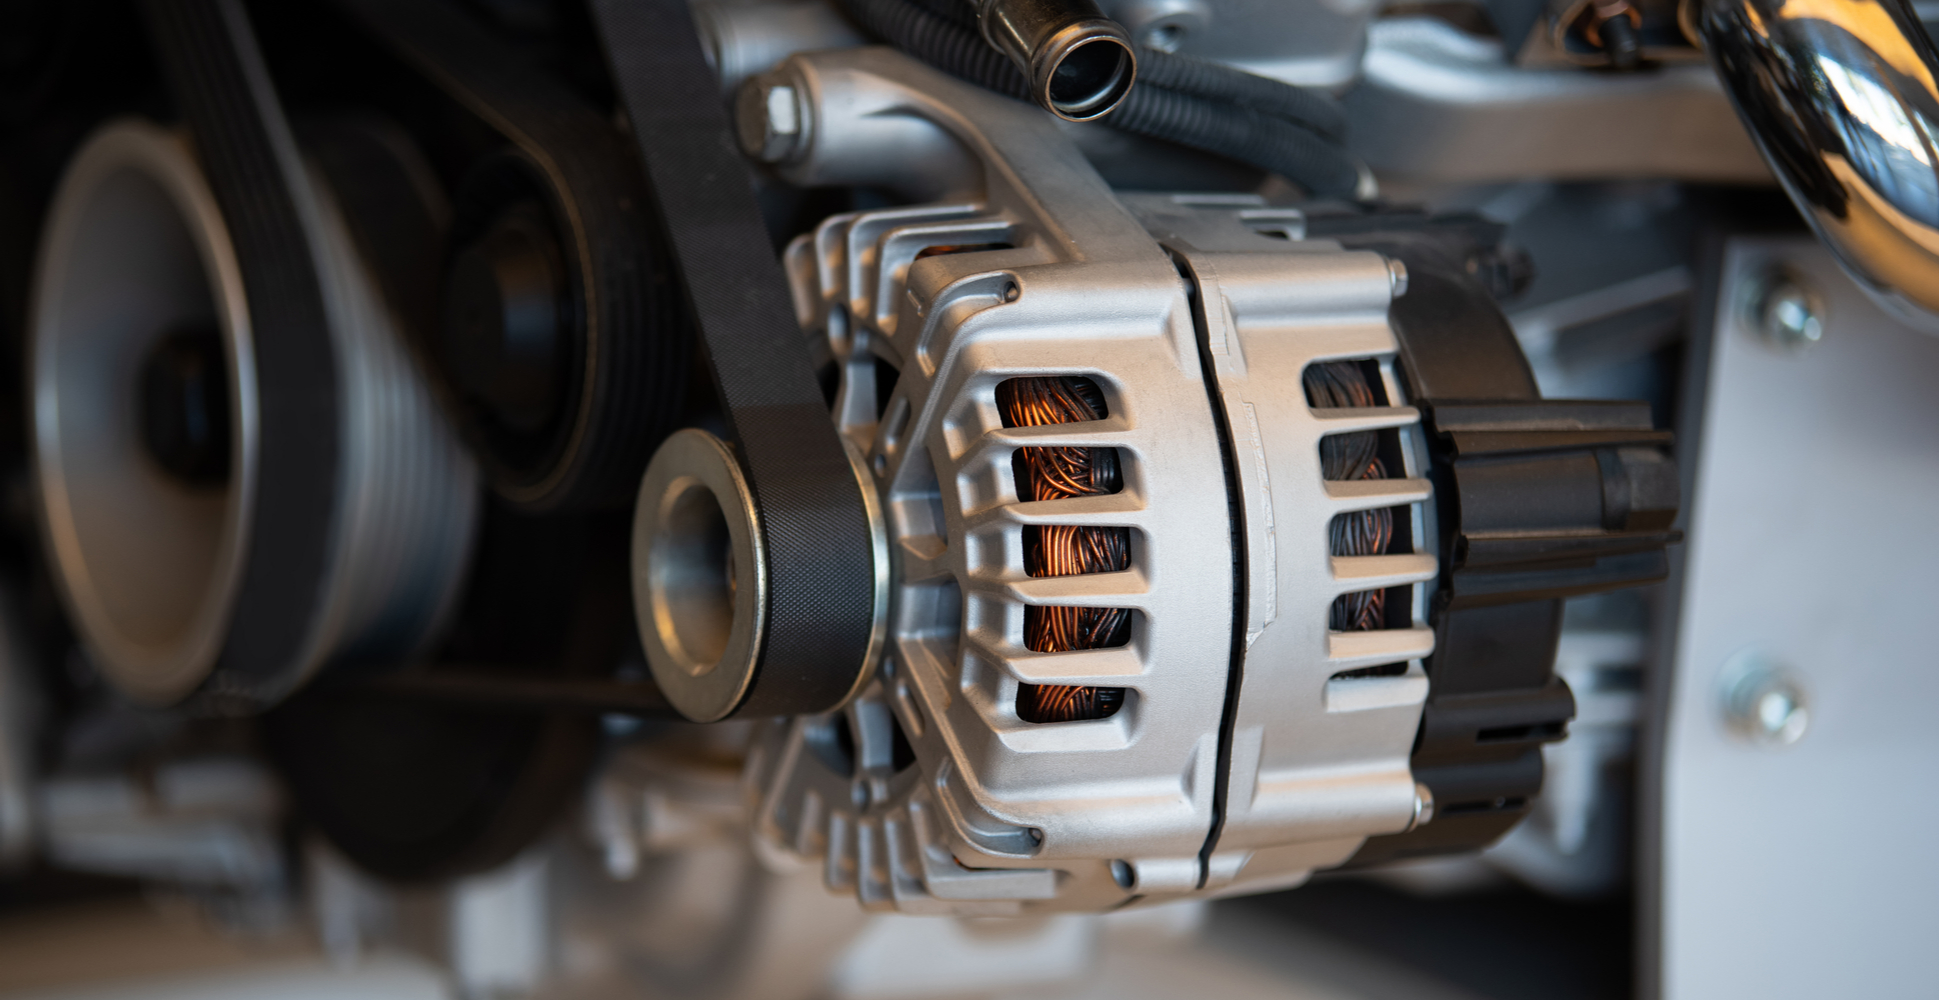 What Size Alternator Do You Need For A Car Audio System?